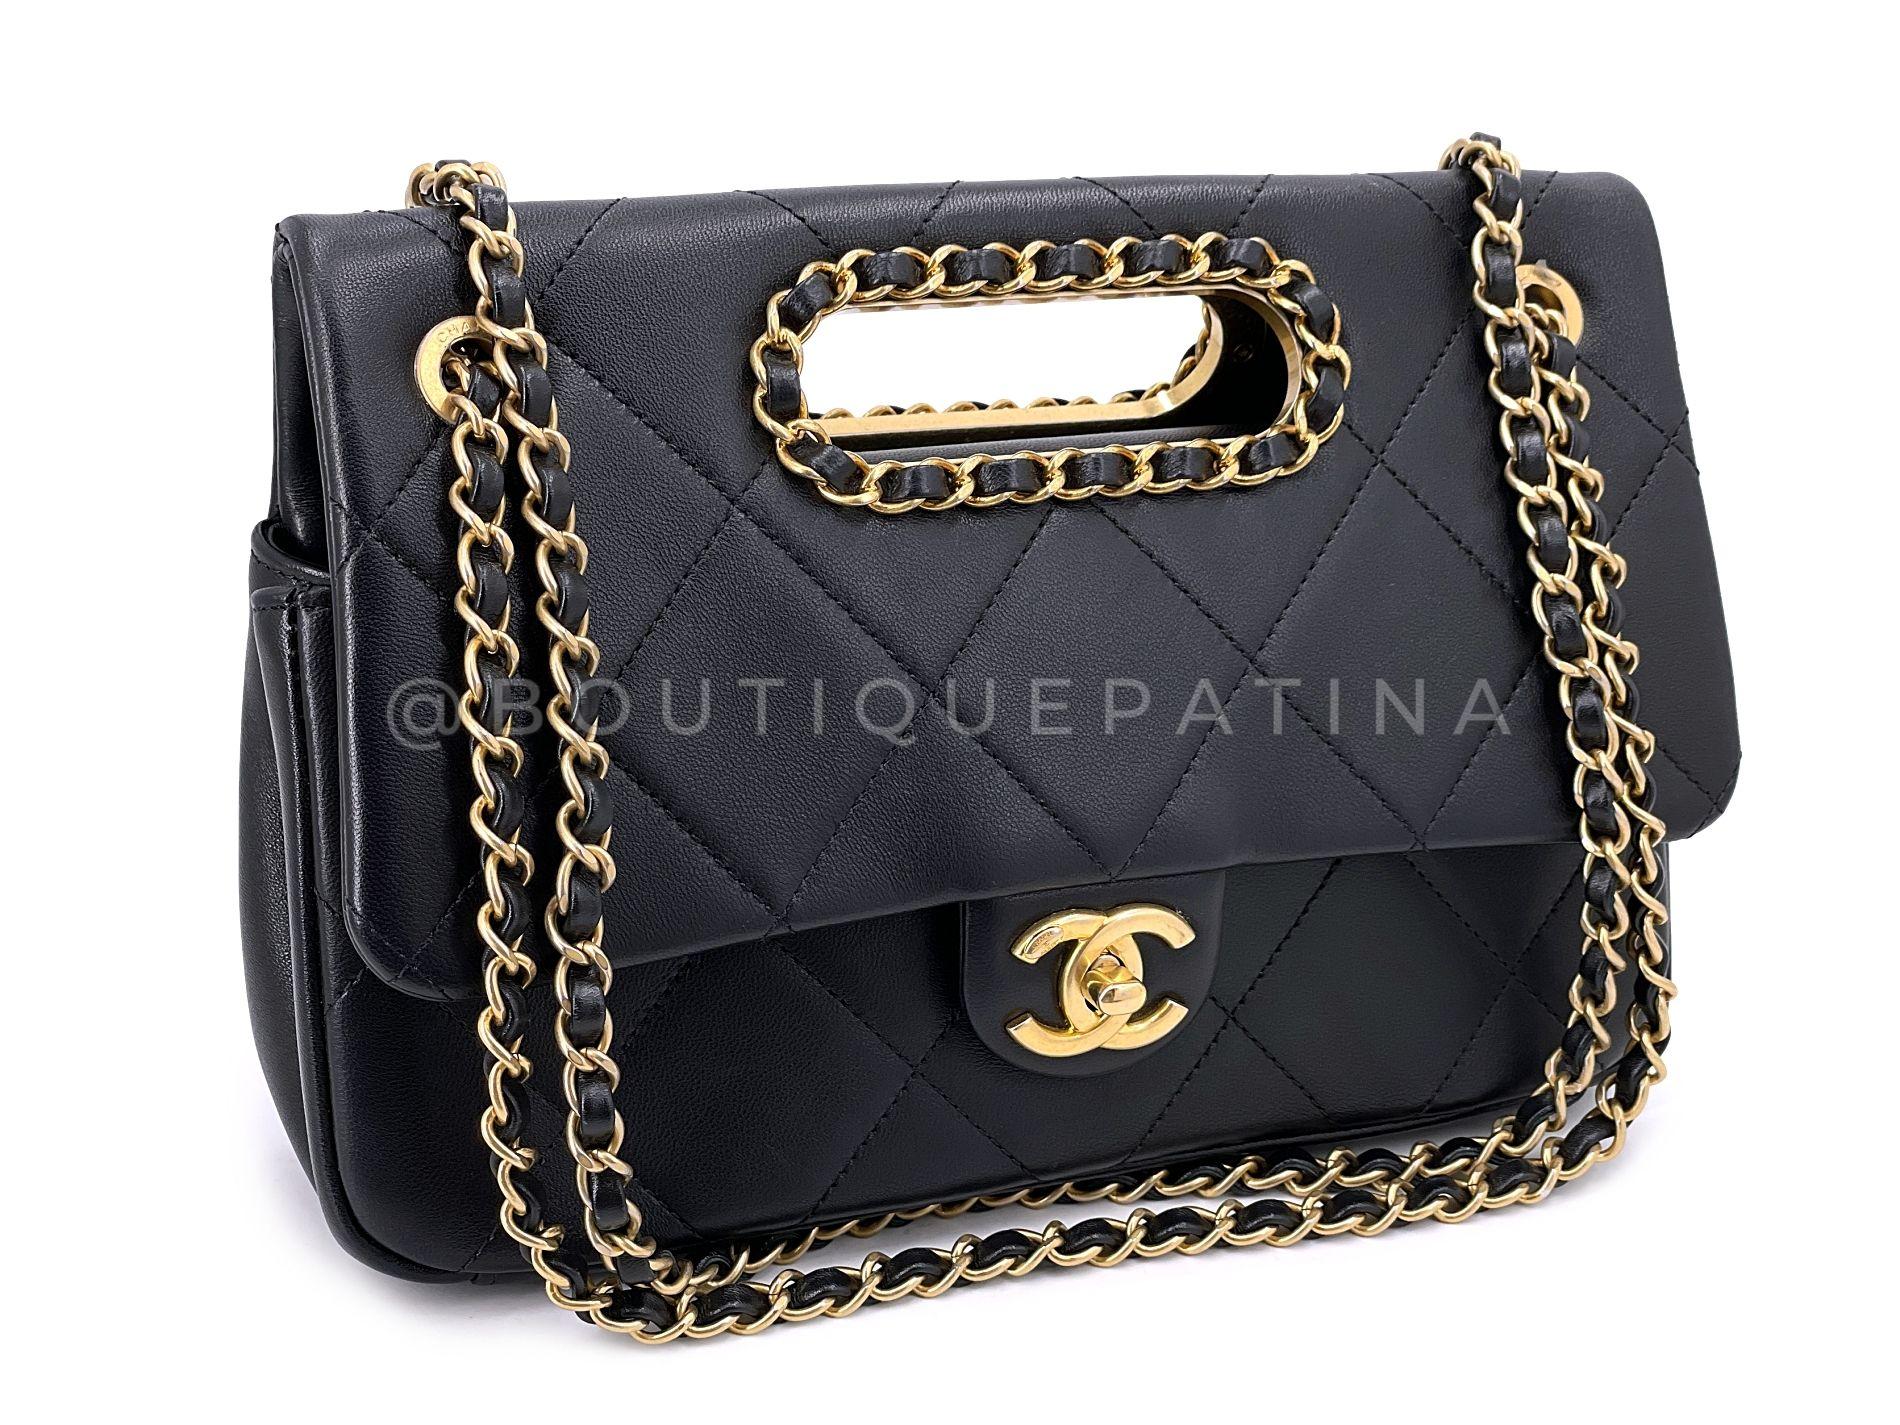 Store item: 68023
Released in 2019, Chanel Black Chain Handle A Real Catch Flap Bag GHW  is a very popular, chic and trendy piece that can be carried both on the shoulder (two ways - long and short chain) and also with a chain cutout handle.

Shaped